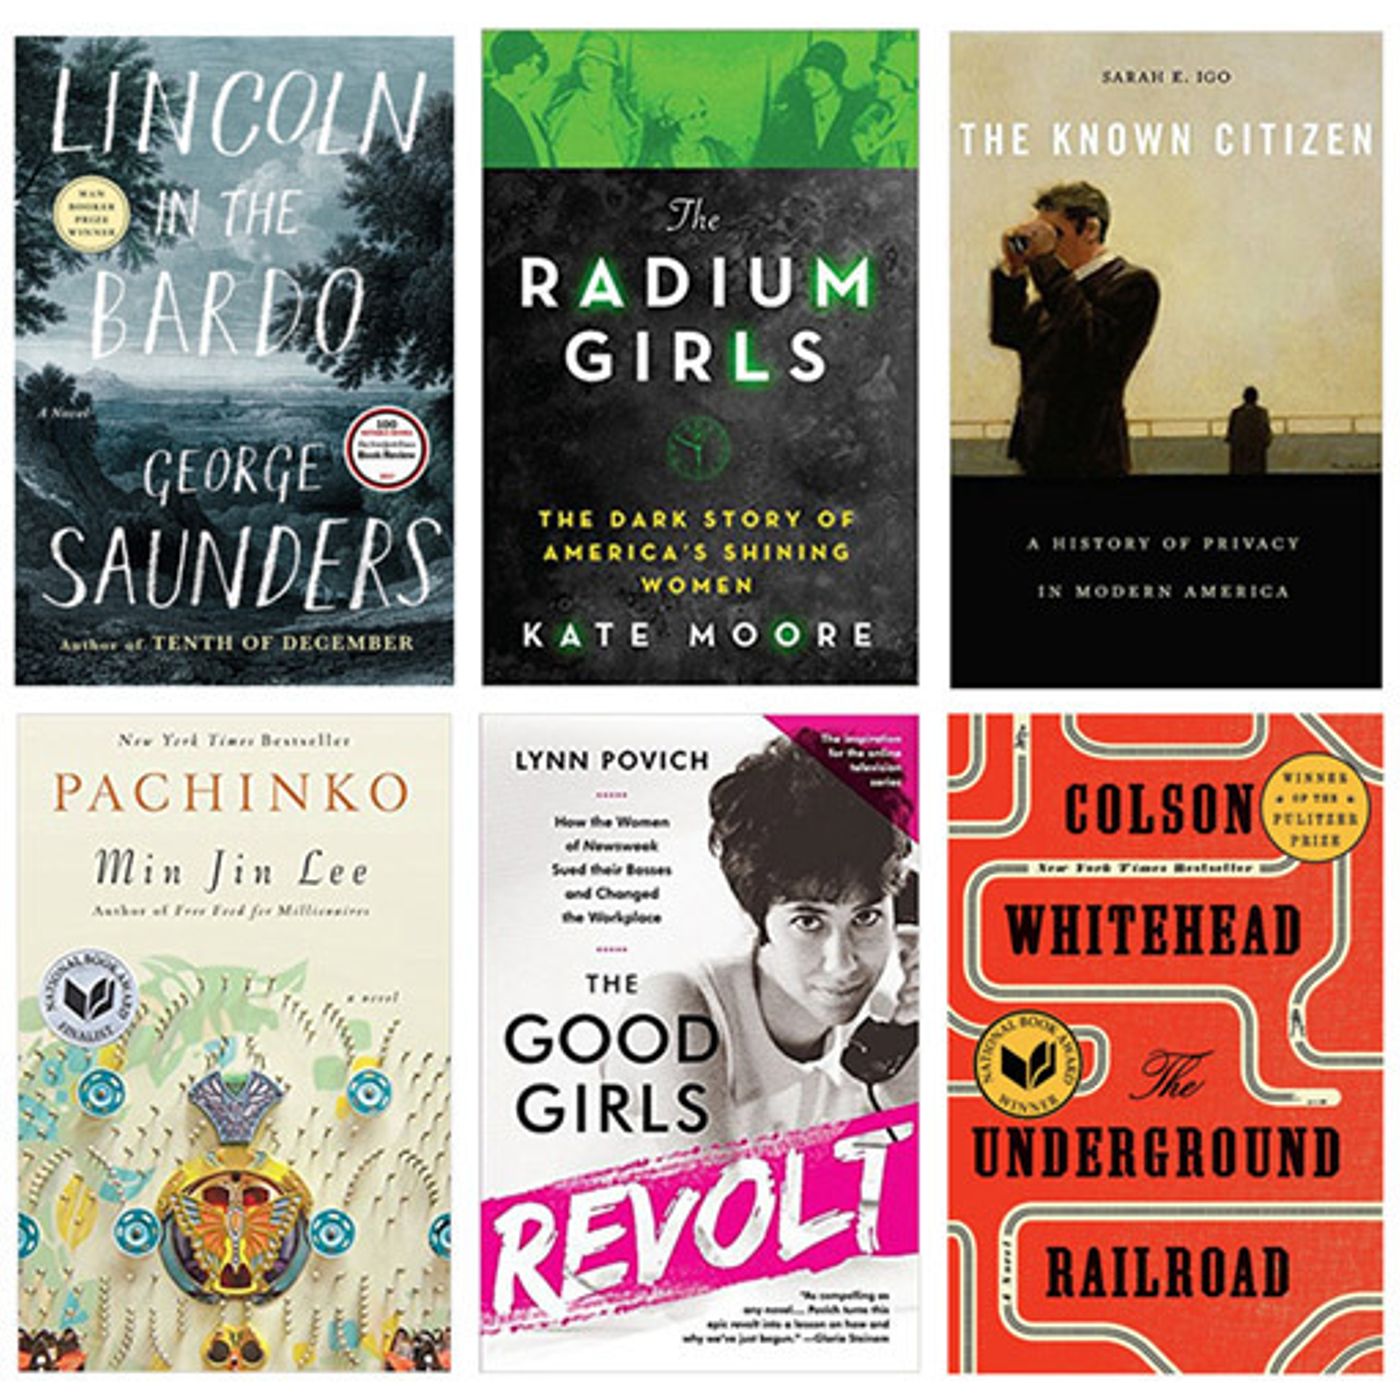 242: Summer Reading List: 14 History Books You’ll Want to Read